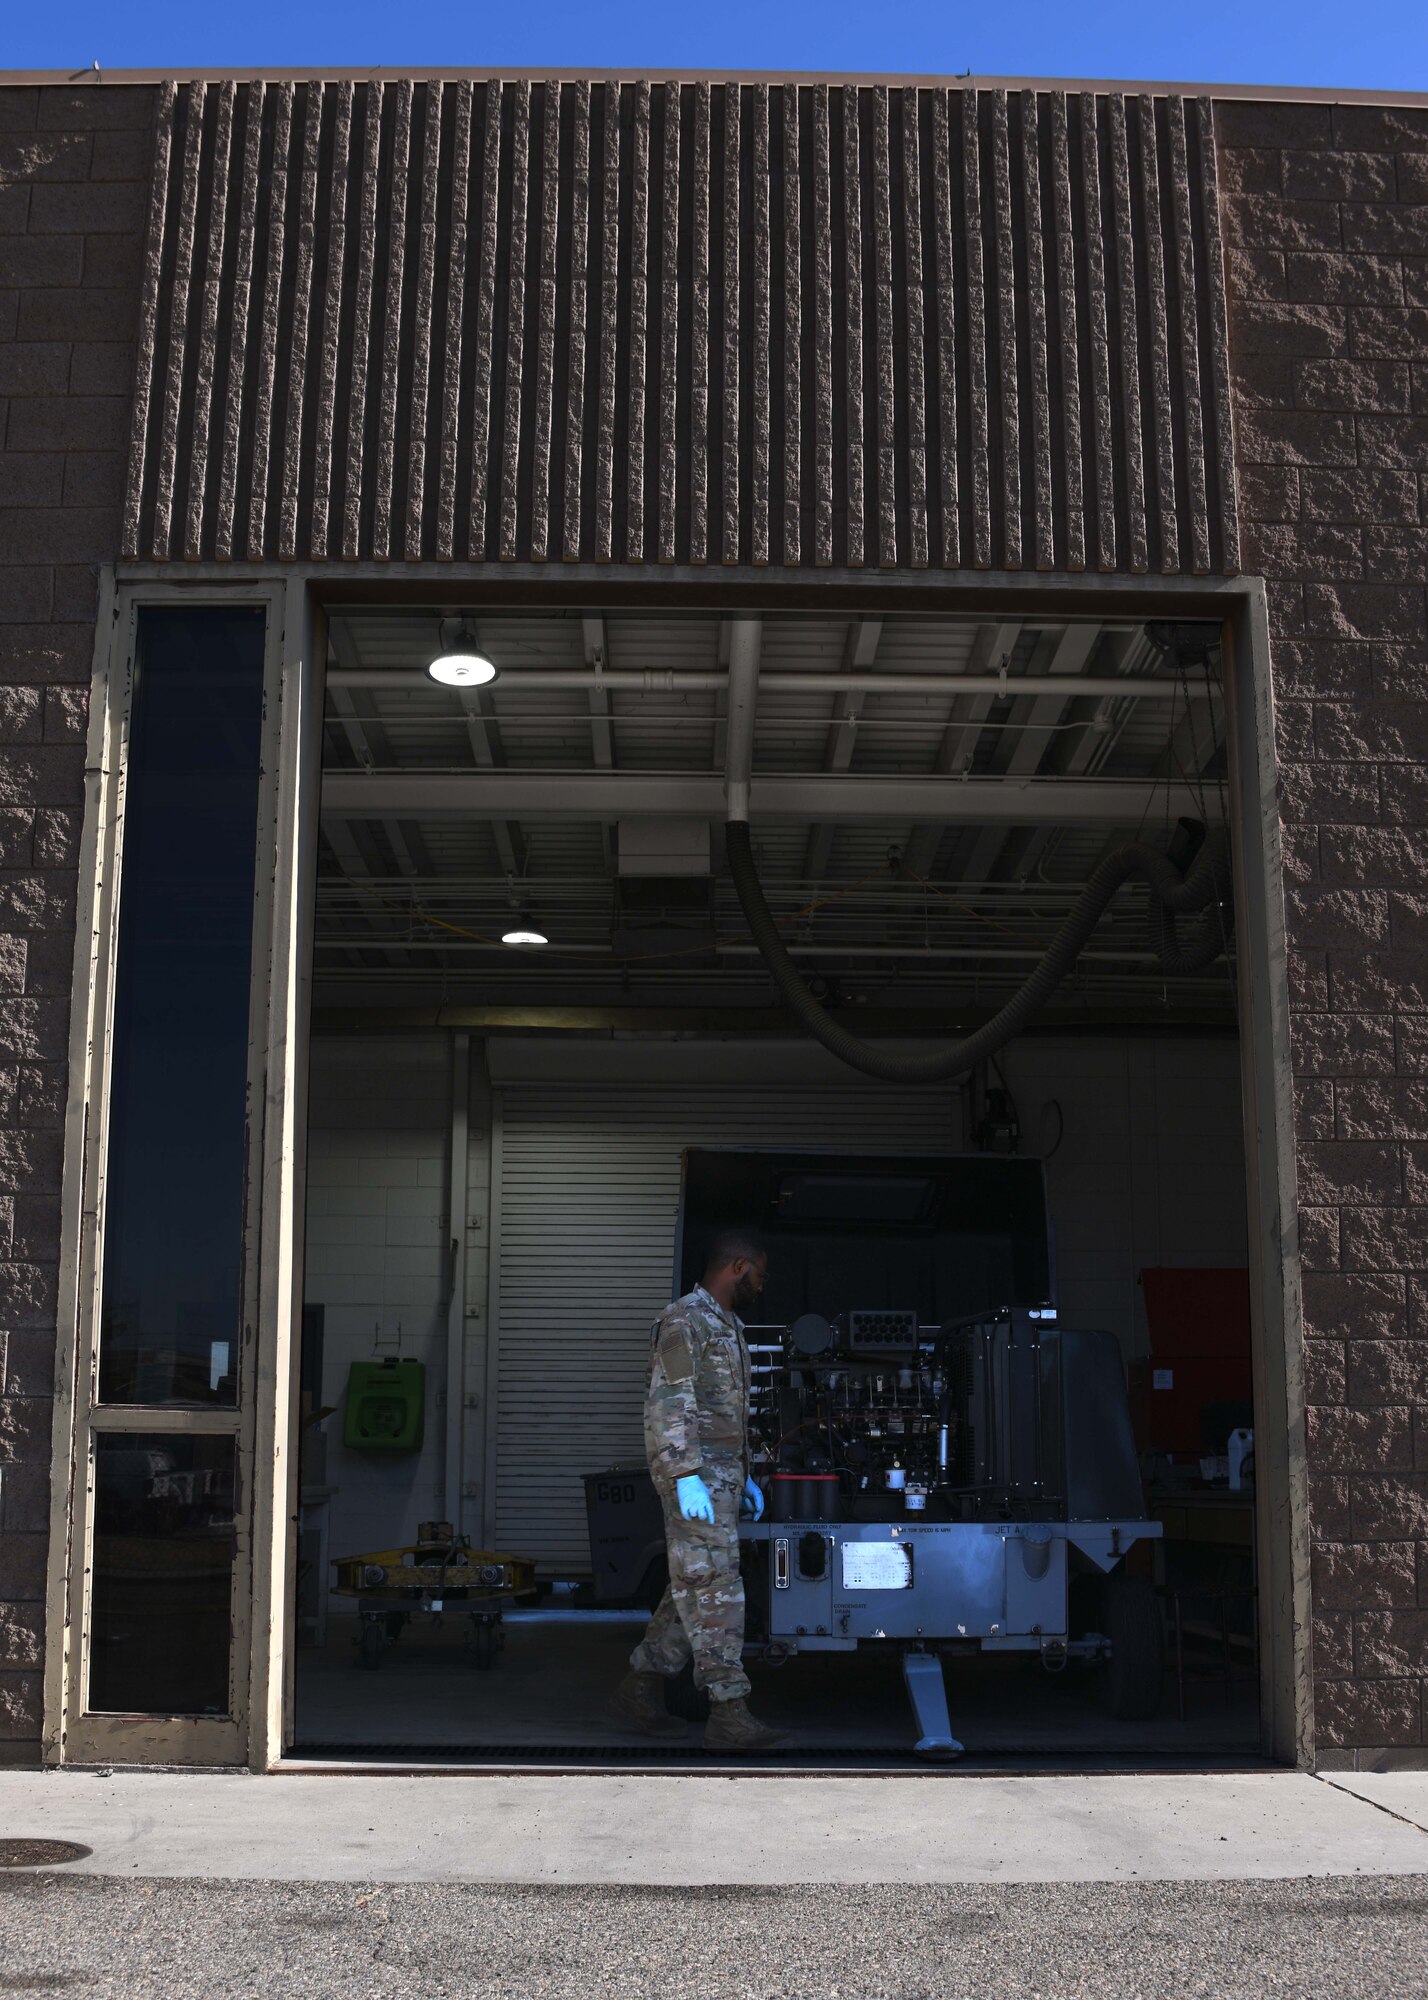 Seen from the outside of a building, A US service member wearing green camo walks around a metal machine